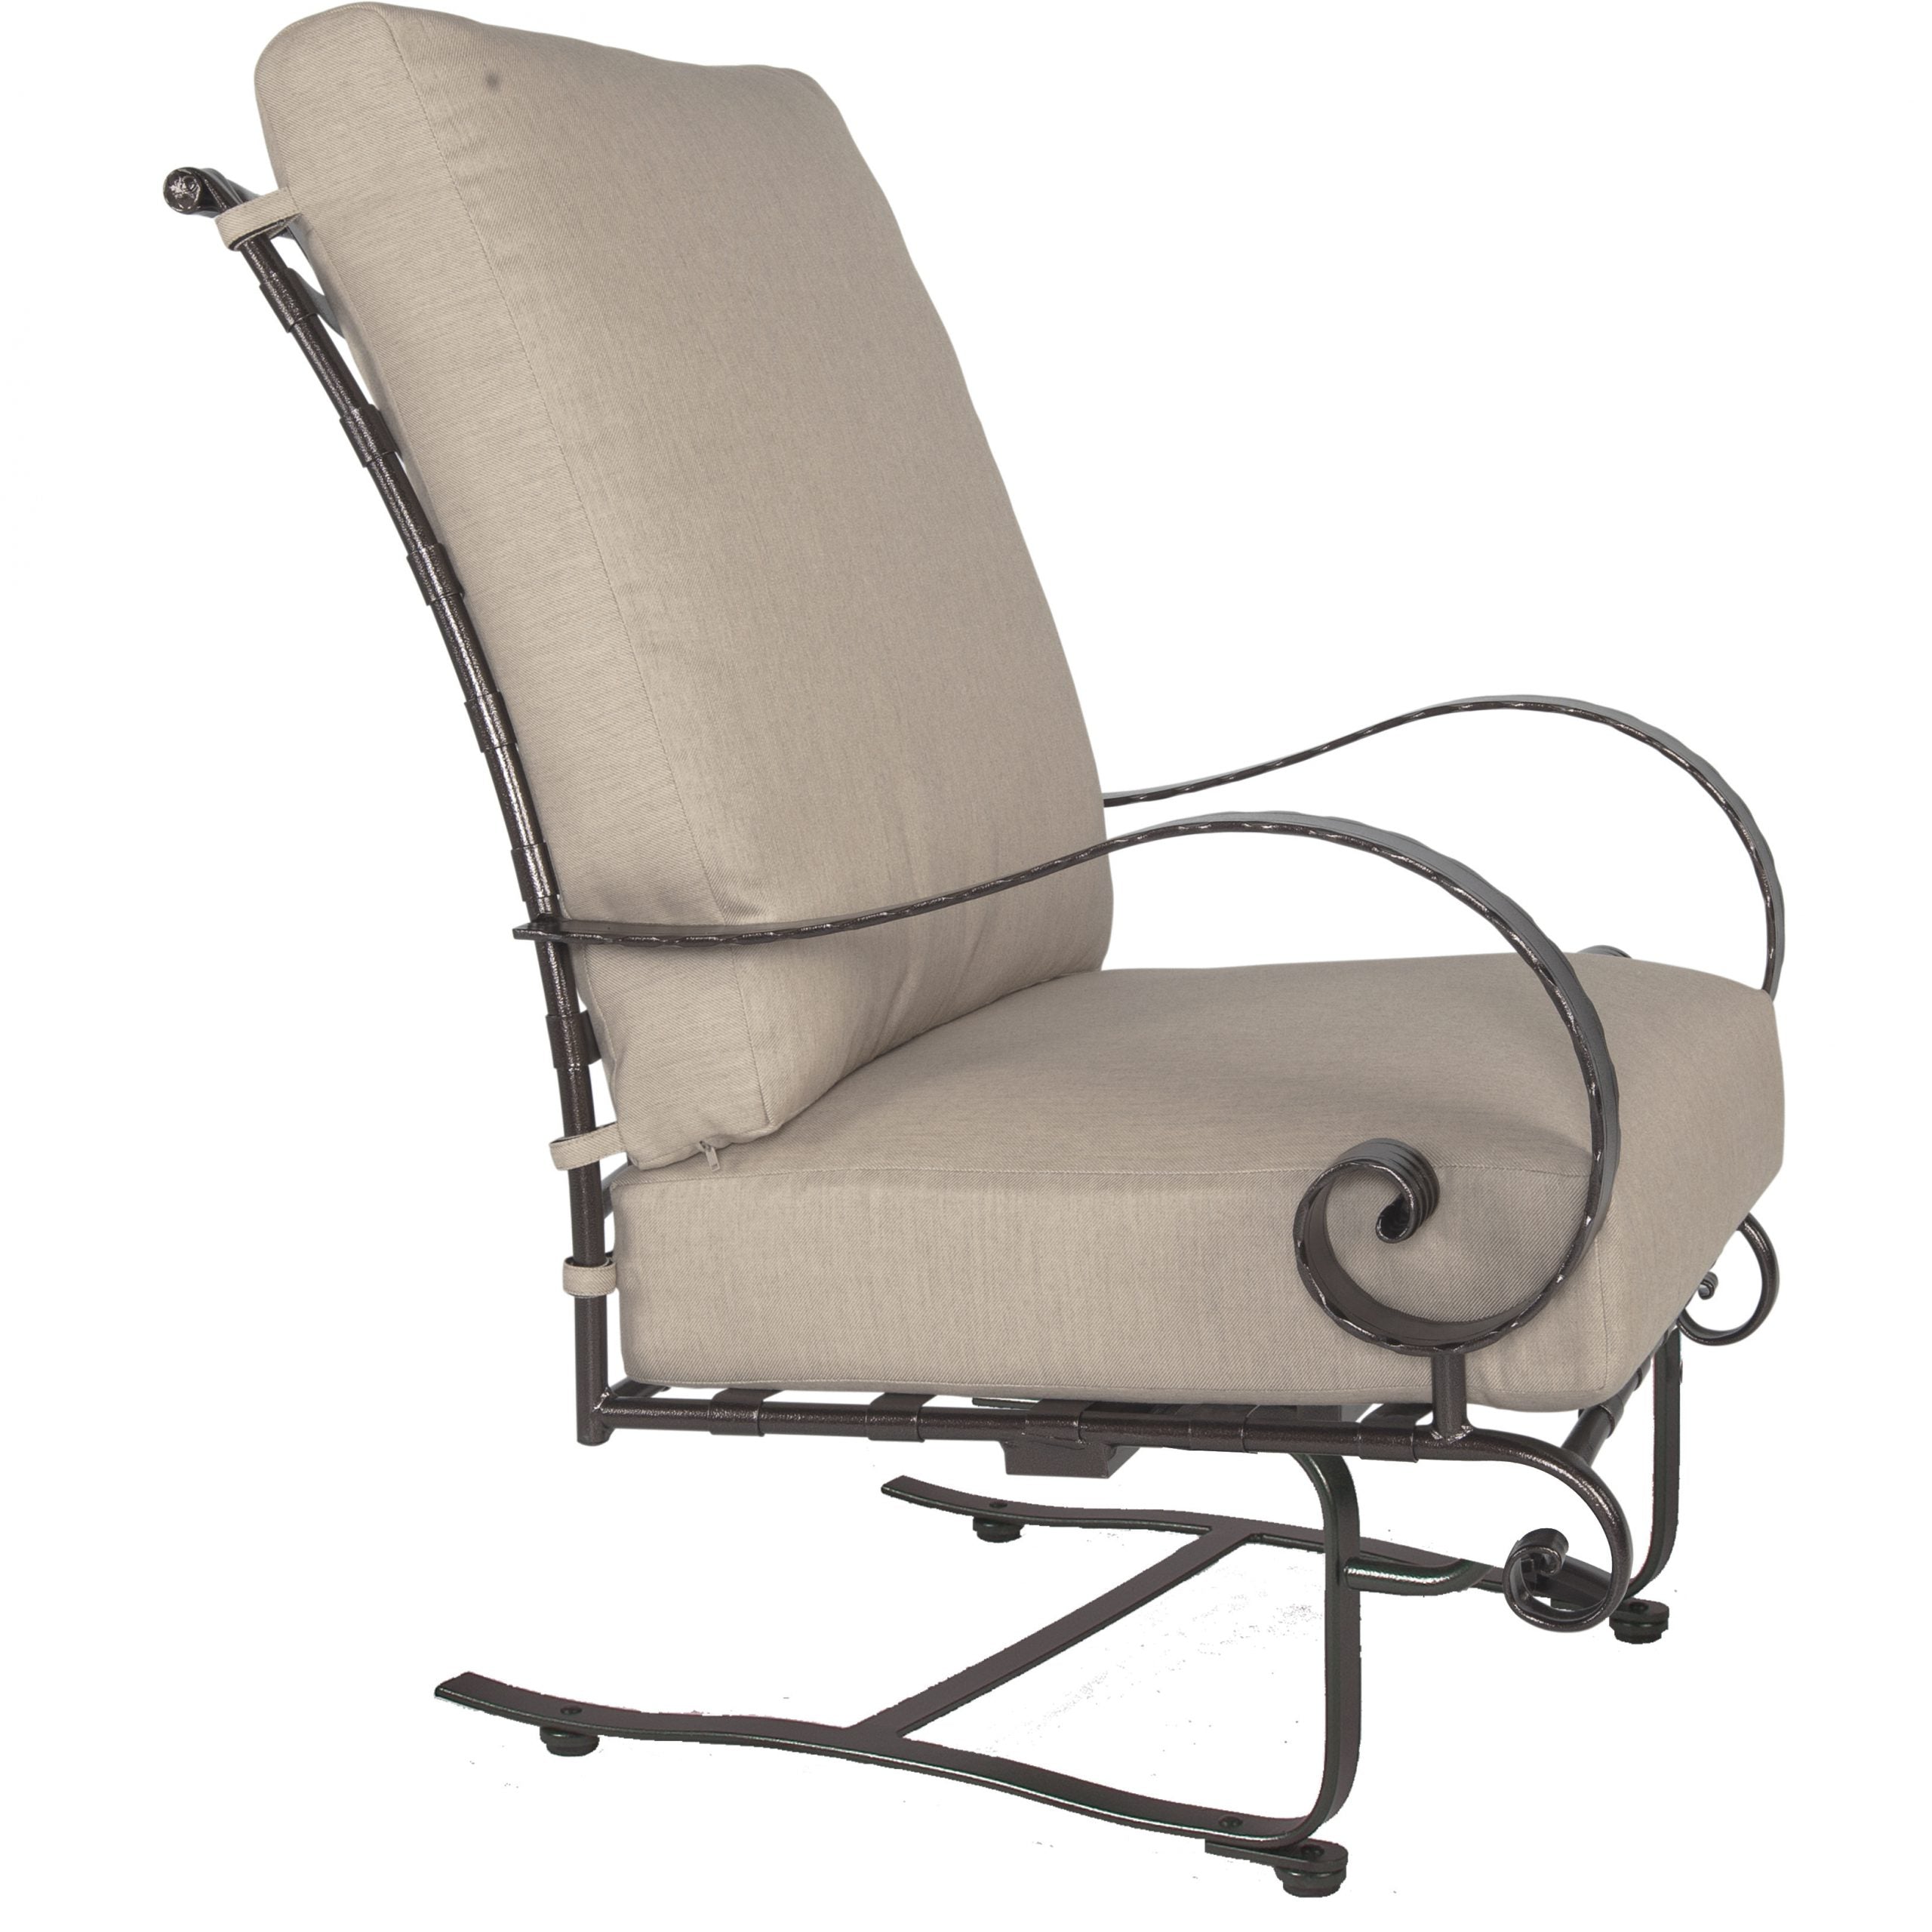 Classico High-Back Spring Base Lounge Chair by Ow Lee